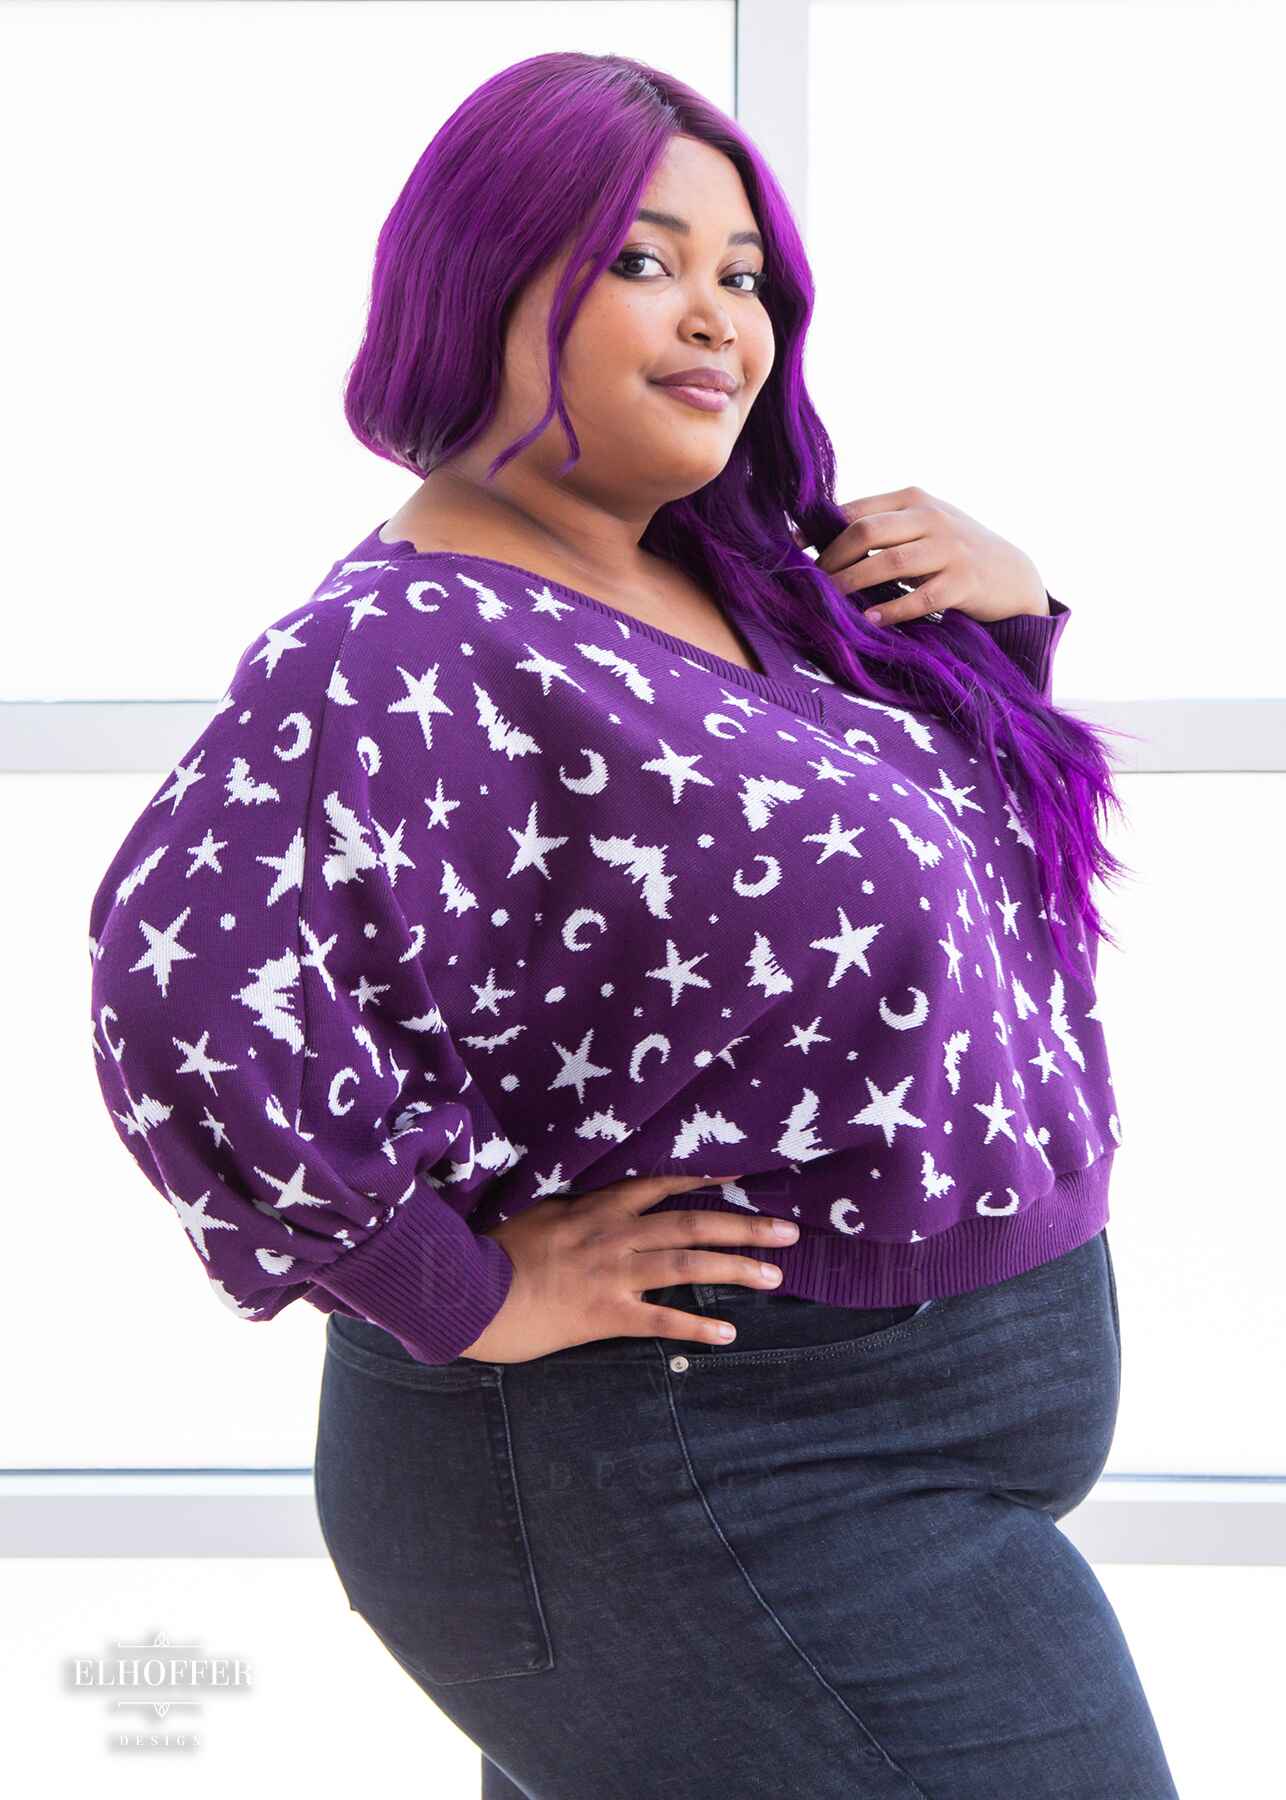 A side view of Jade, a light skinned 2xl model with long wavy purple hair, wearing an oversized v neck cropped sweater with batwing sleeves that gather at the wrist. The main body of the sweater is purple with a white bat, star, moon, and dot pattern repeated throughout.